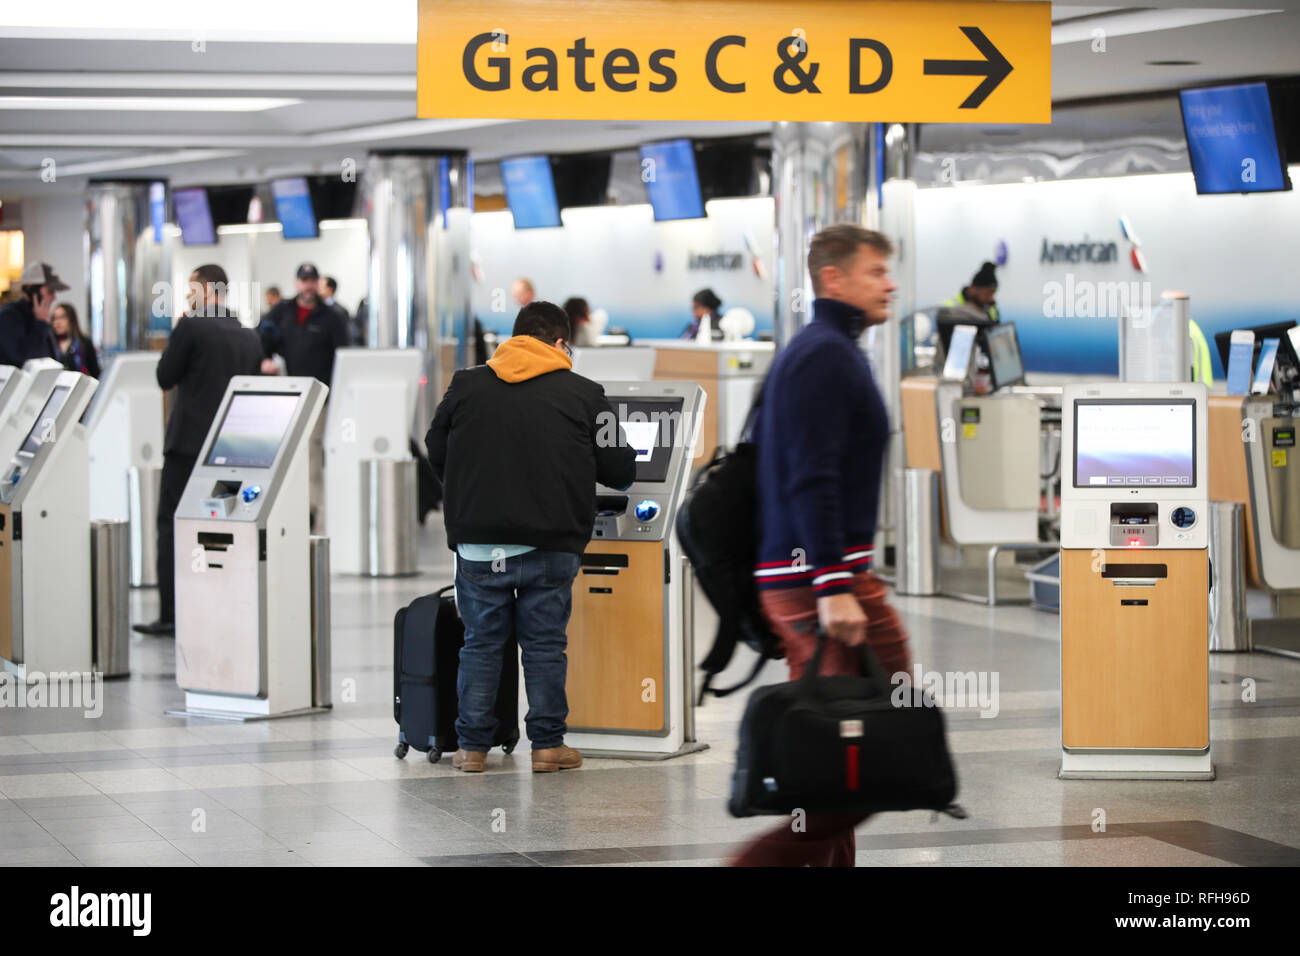 New York, USA. 25th Jan, 2019. A passenger uses a self-service kiosk to check in at the LaGuardia Airport in New York, the United States, on Jan. 25, 2019. The U.S. Federal Aviation Administration on Friday halted flights bound for New York City's LaGuardia Airport, due to staff shortage caused by the historic government shutdown. Credit: Wang Ying/Xinhua/Alamy Live News Stock Photo